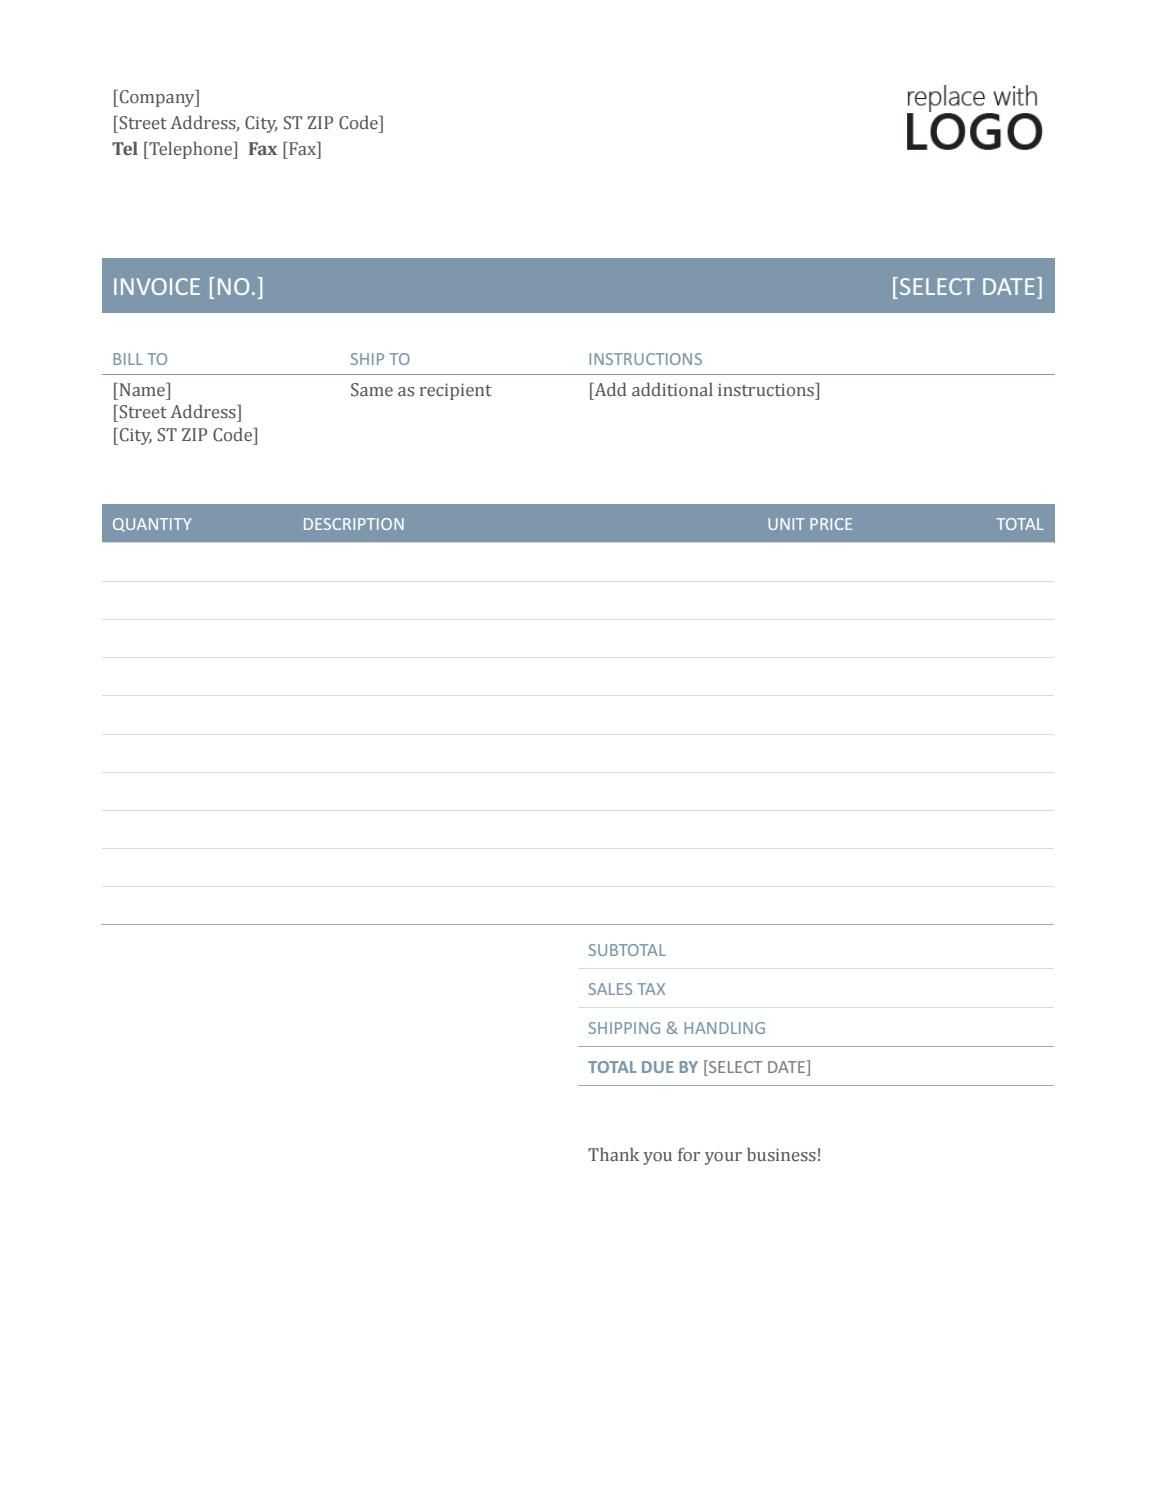 Travel Expenses Quotation Template | Invoice Template Word For Web Design Invoice Template Word